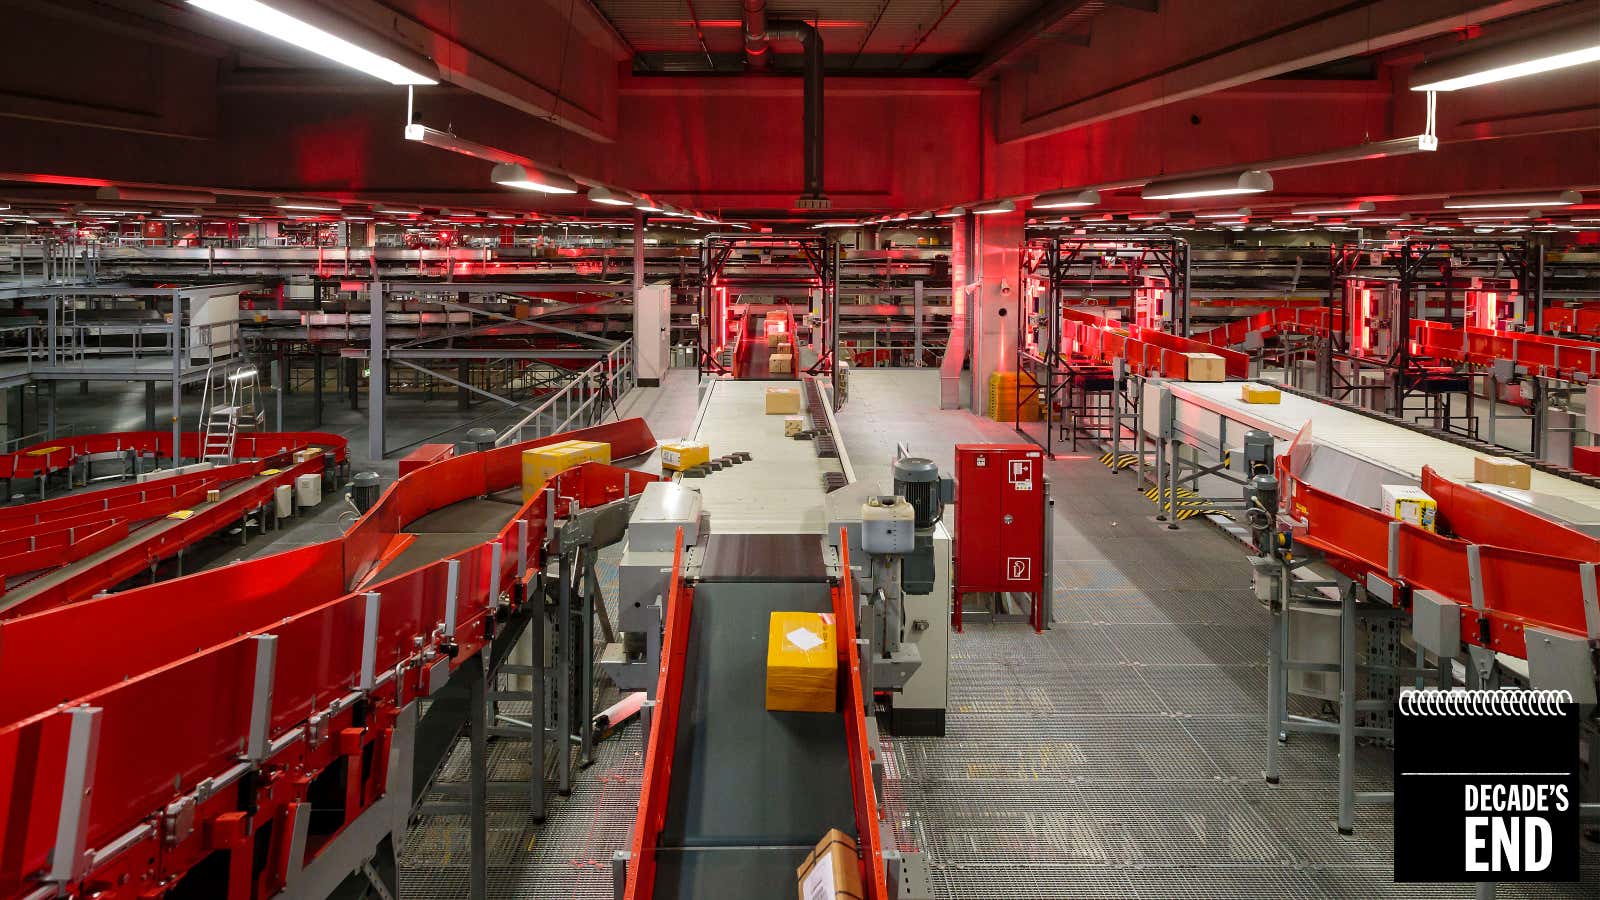 A view of the fully automated section of the main building of the DHL hub in 2014, Leipzig, Germany.